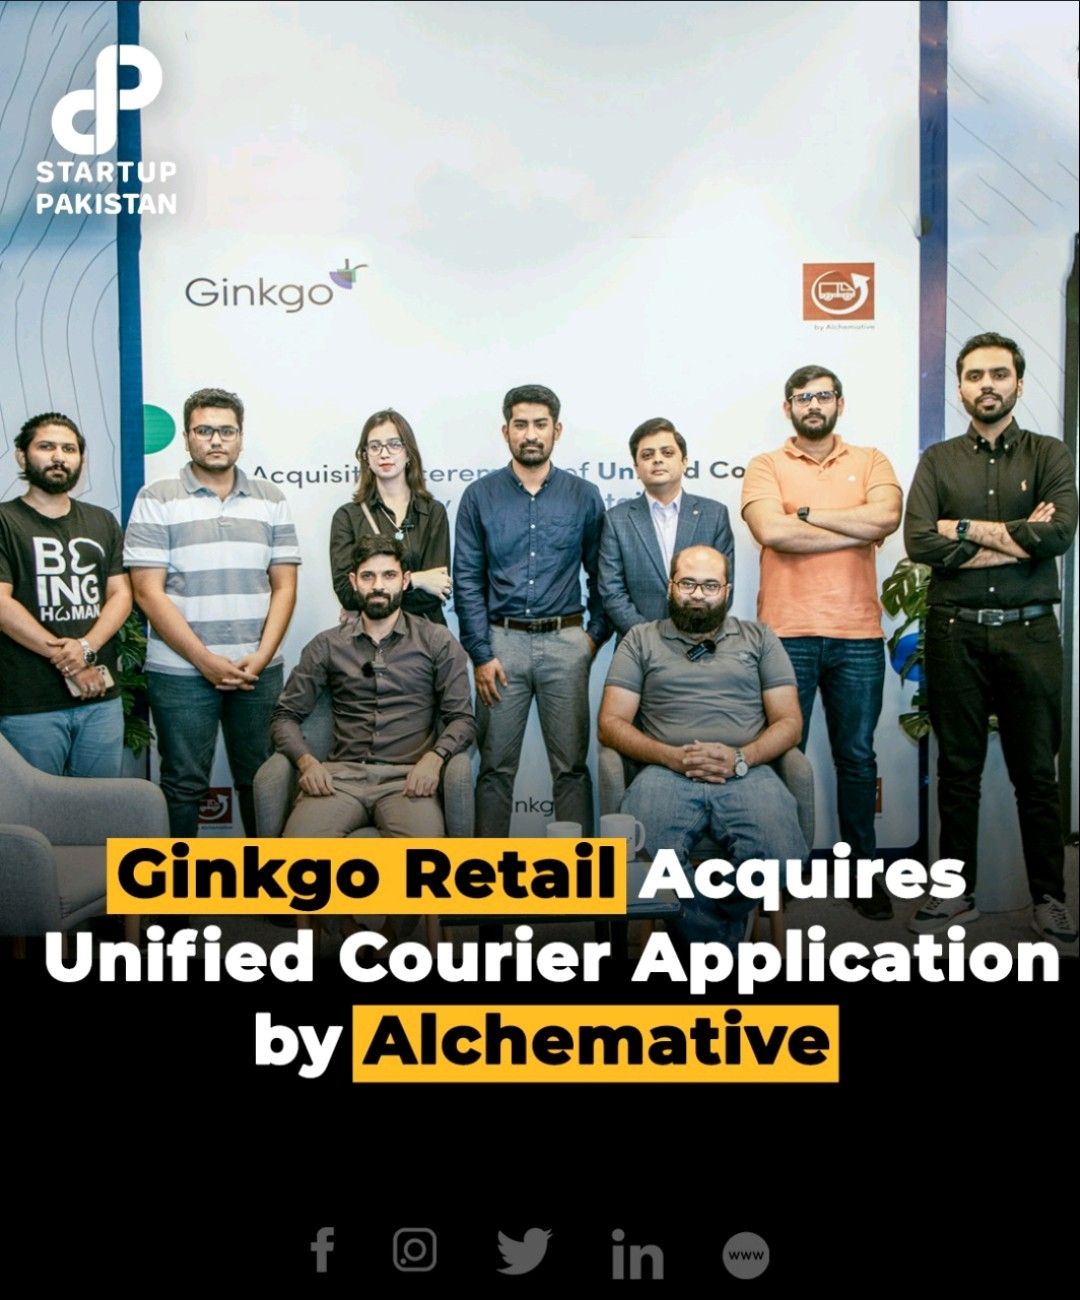 Ginkgo Retail acquired Unified Courier Application by Alchemative.